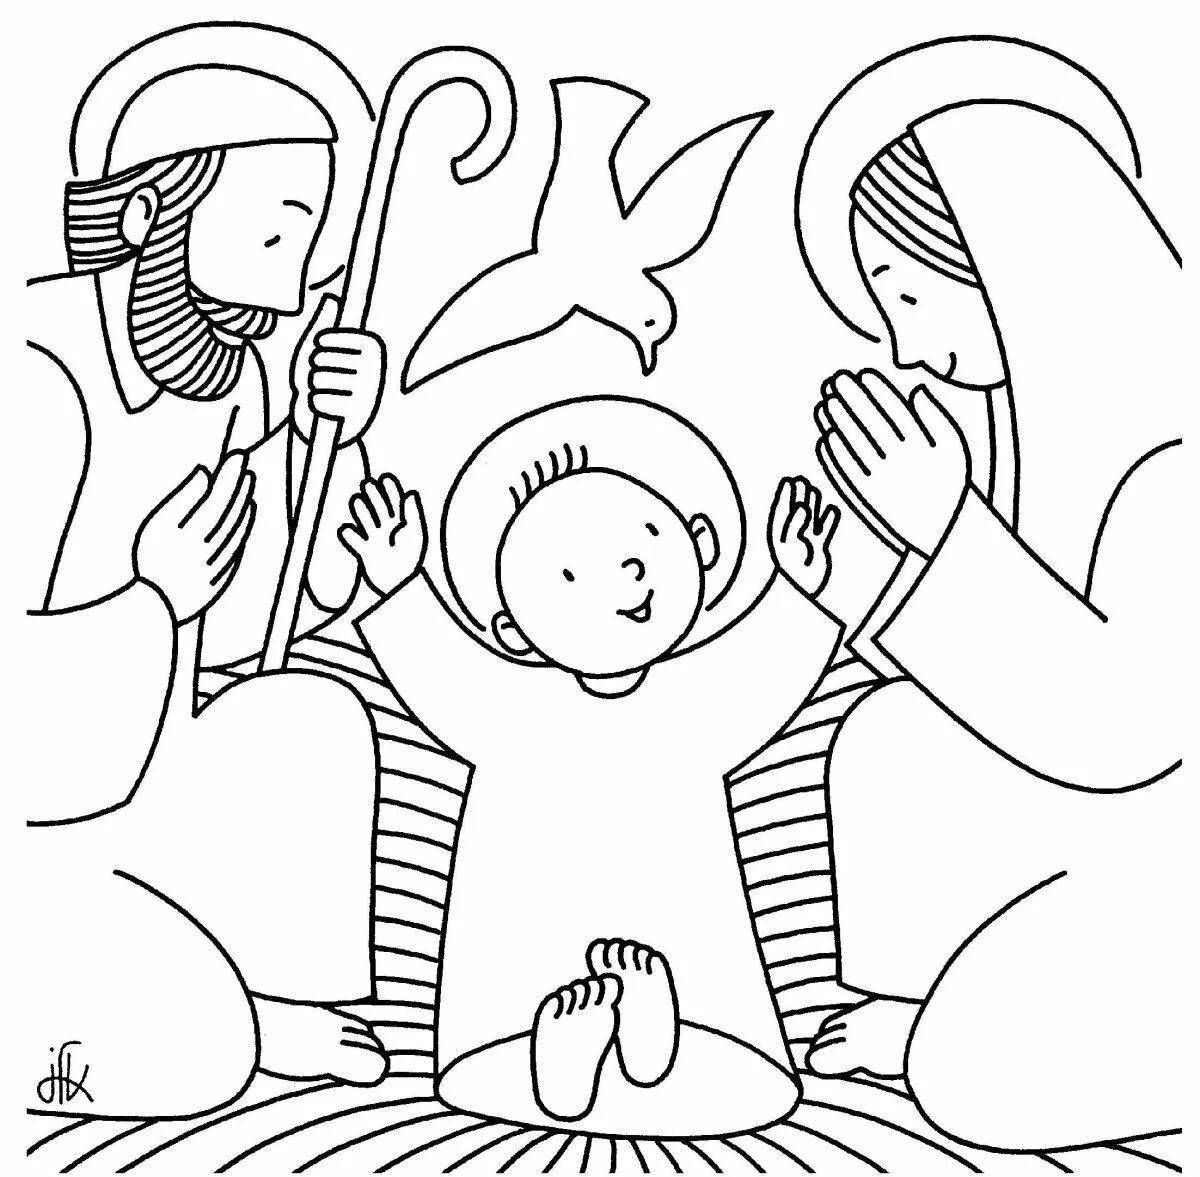 Blessed Christmas carol coloring pages for children